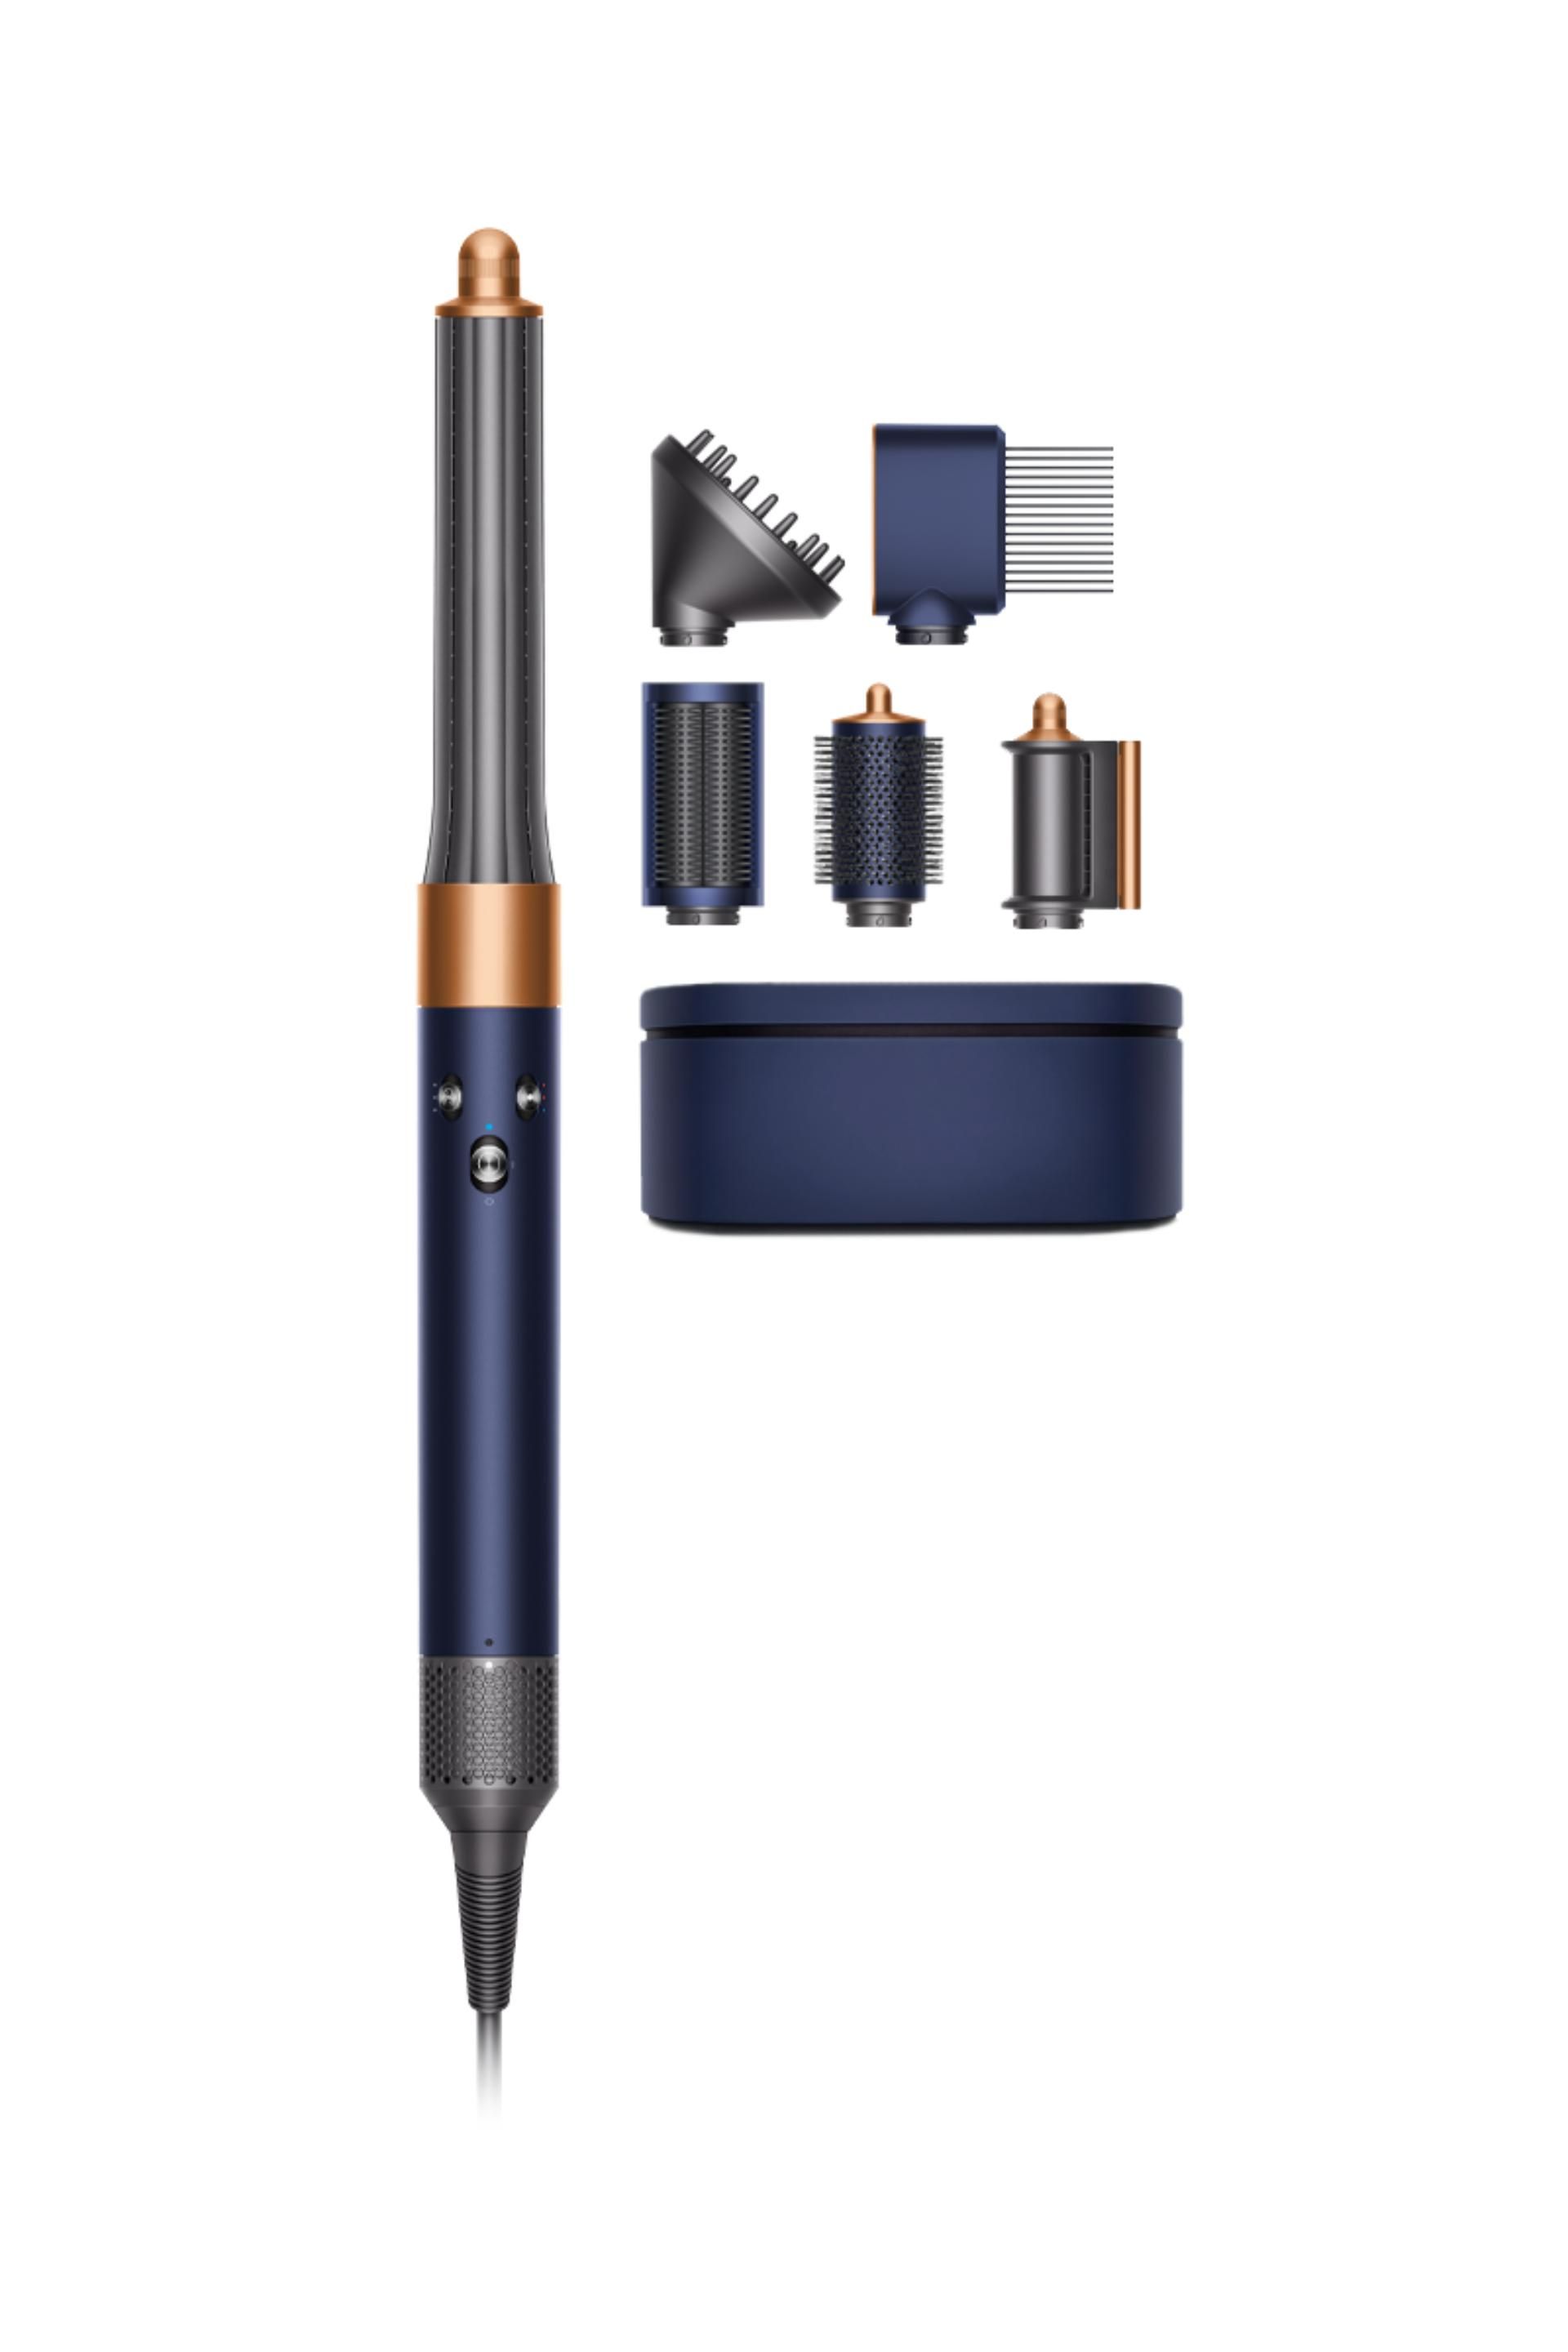 Dyson Airwrap™ multi-styler and dryer Complete Long Diffuse - Prussian Blue/Rich Copper | Dyson (US)